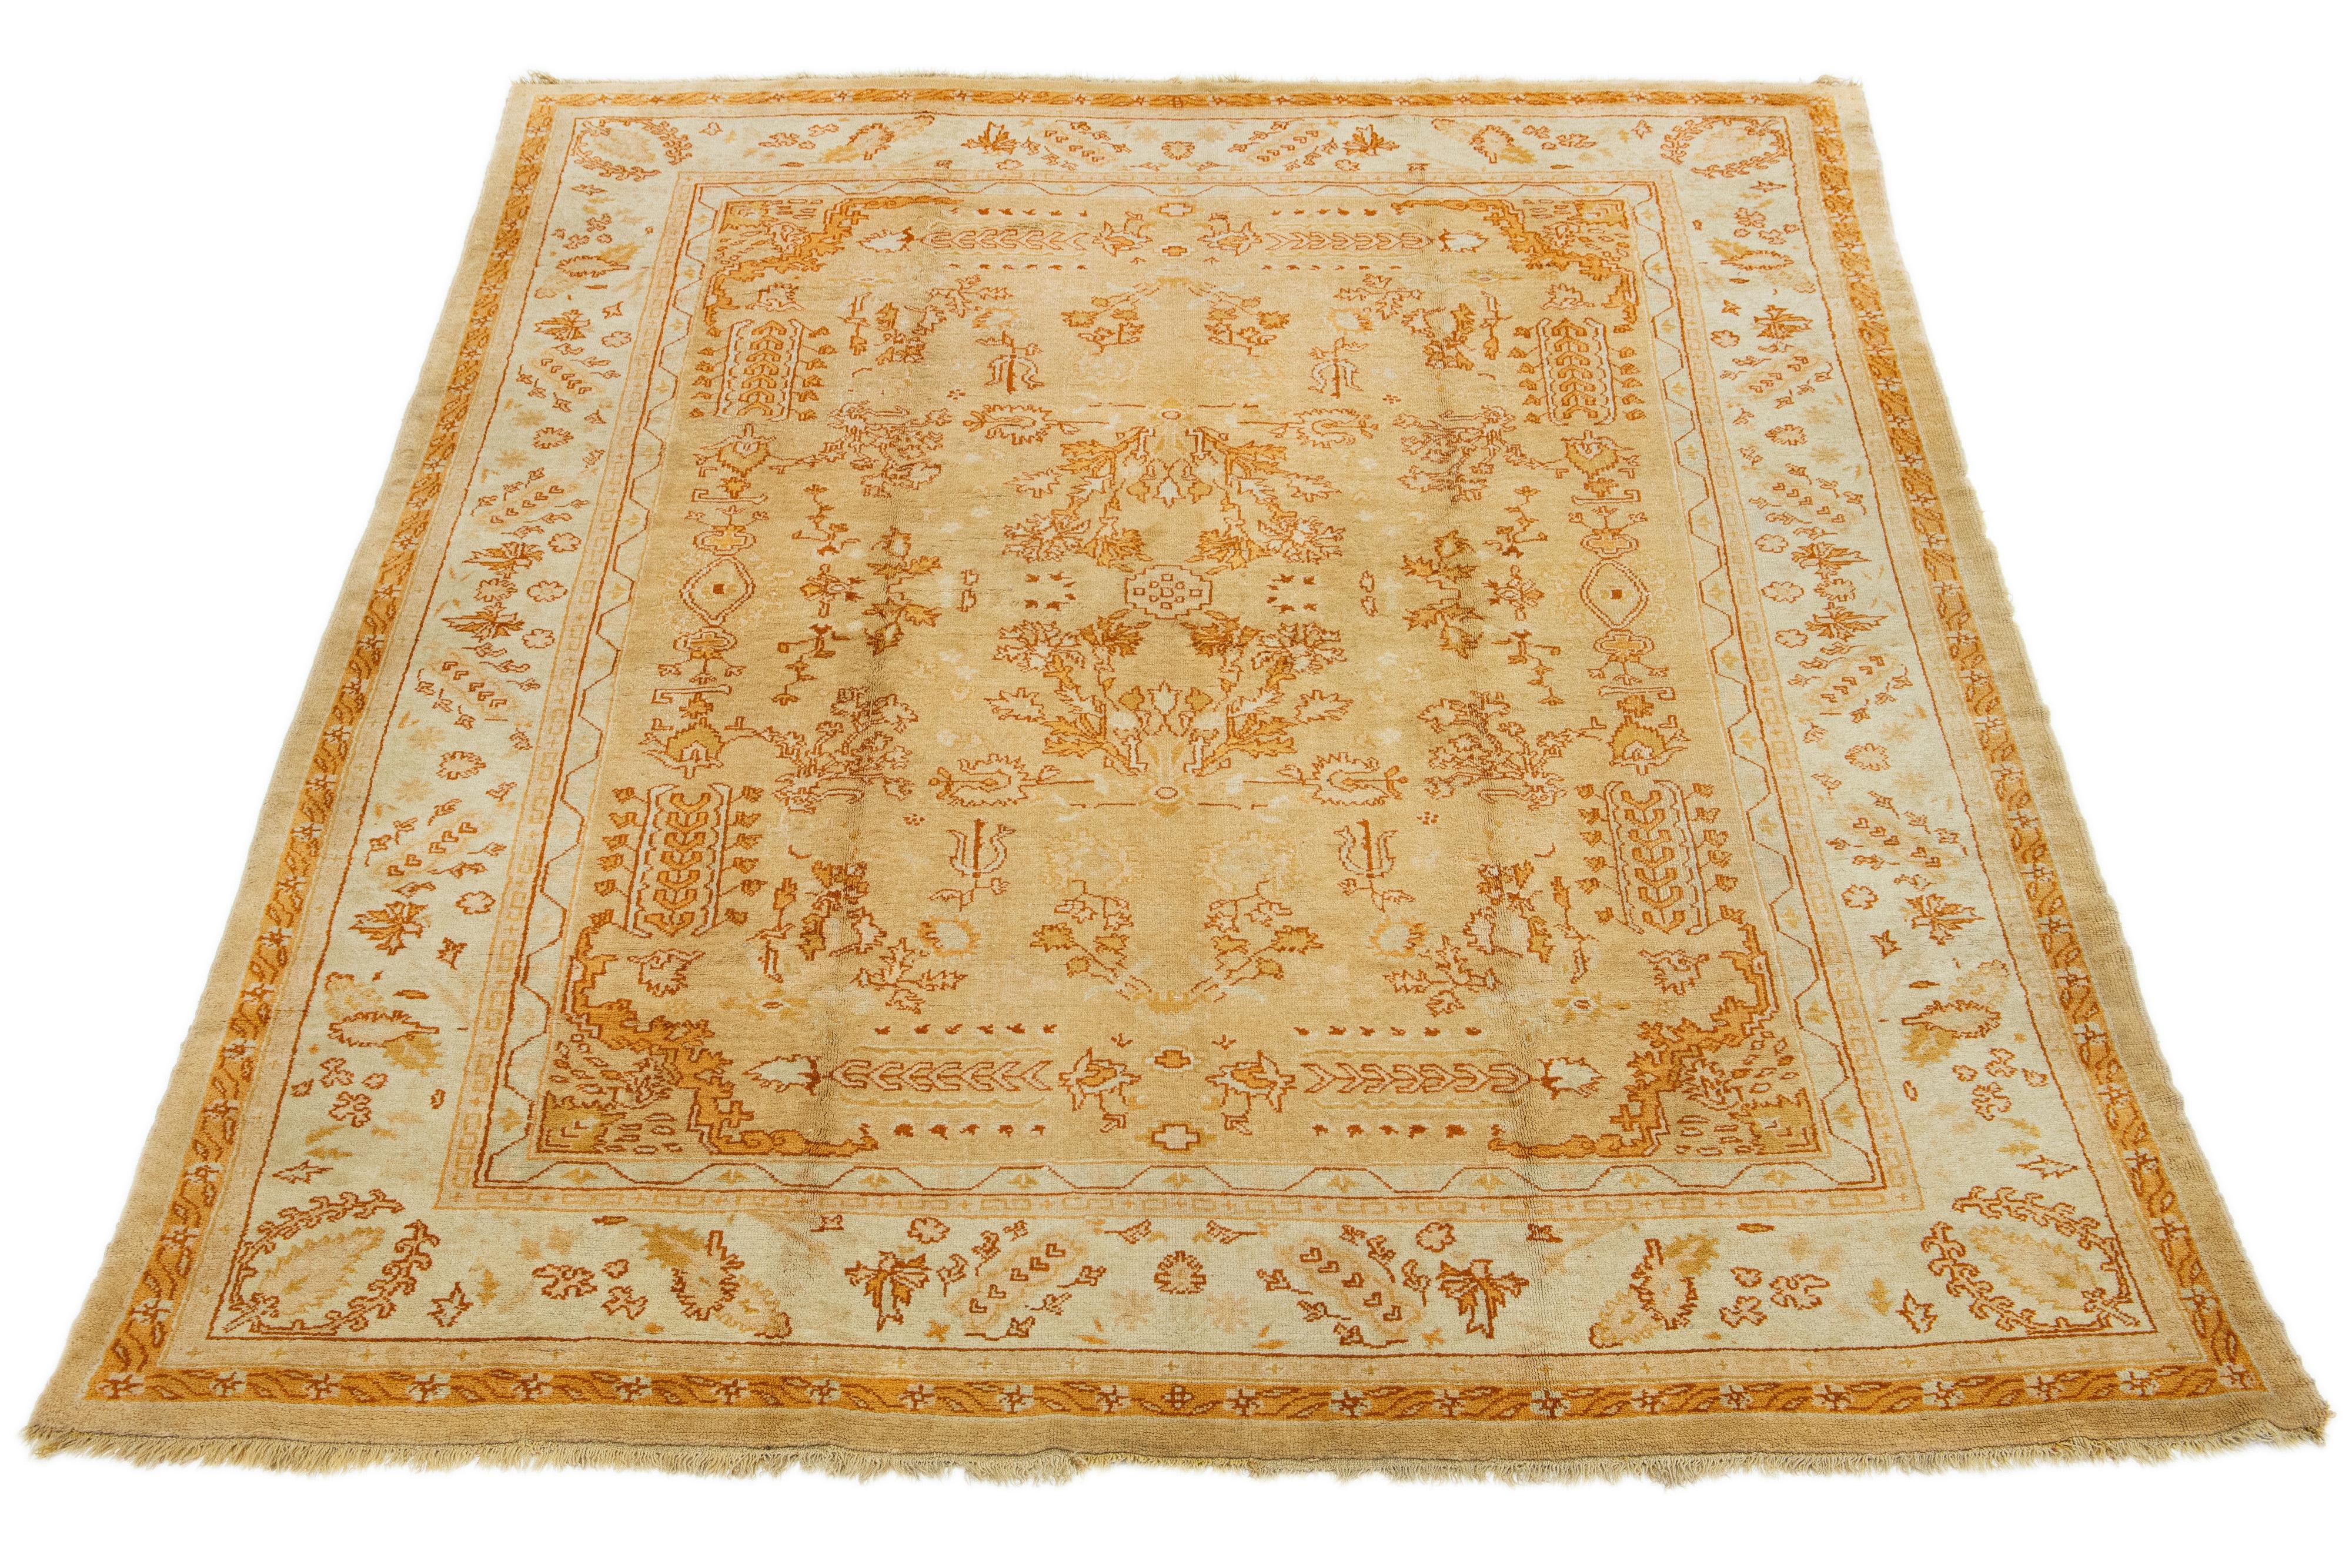 Unique Turkish Oushak rug. Hand-knotted with premium wool. Tan beige field, light blue border, vibrant floral design with orange and golden accents.

This rug measures 9'5'' x 12'8''.